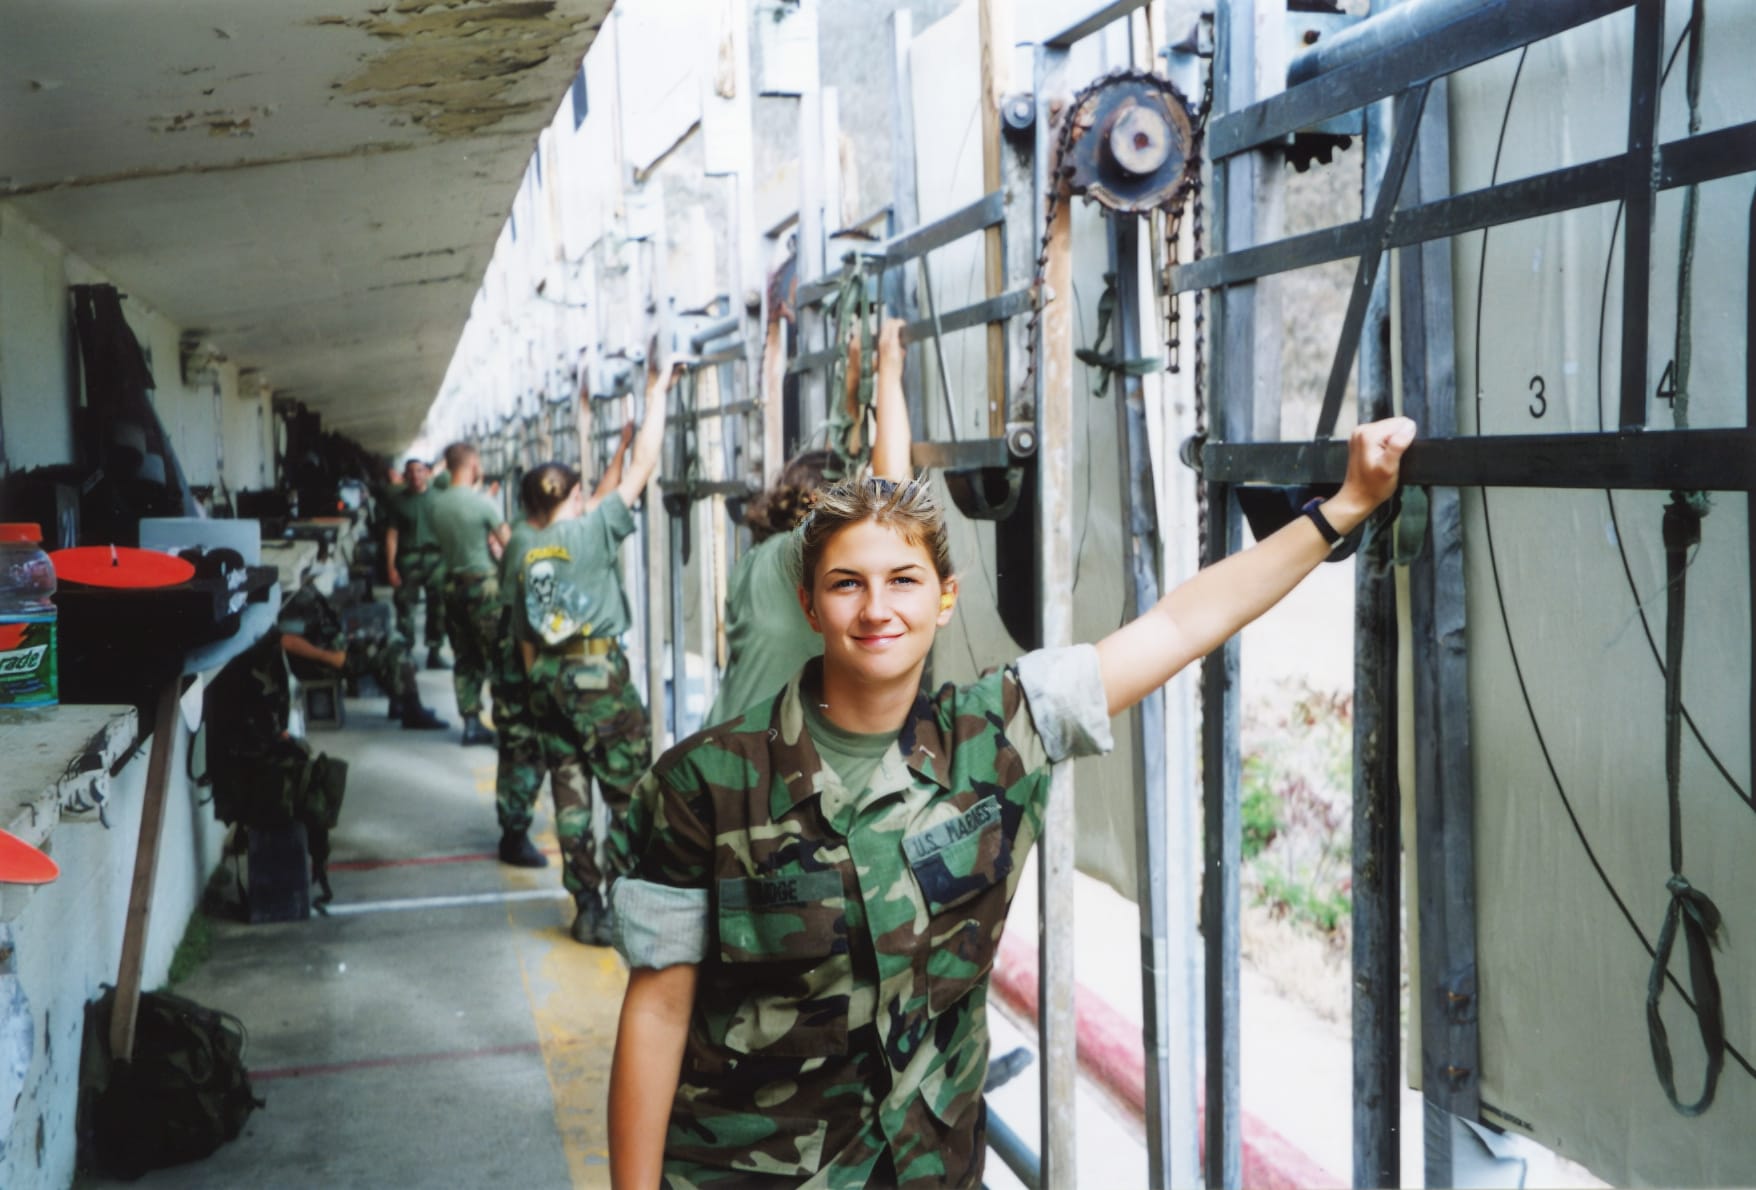 Angie leaning against a wall in her military uniform